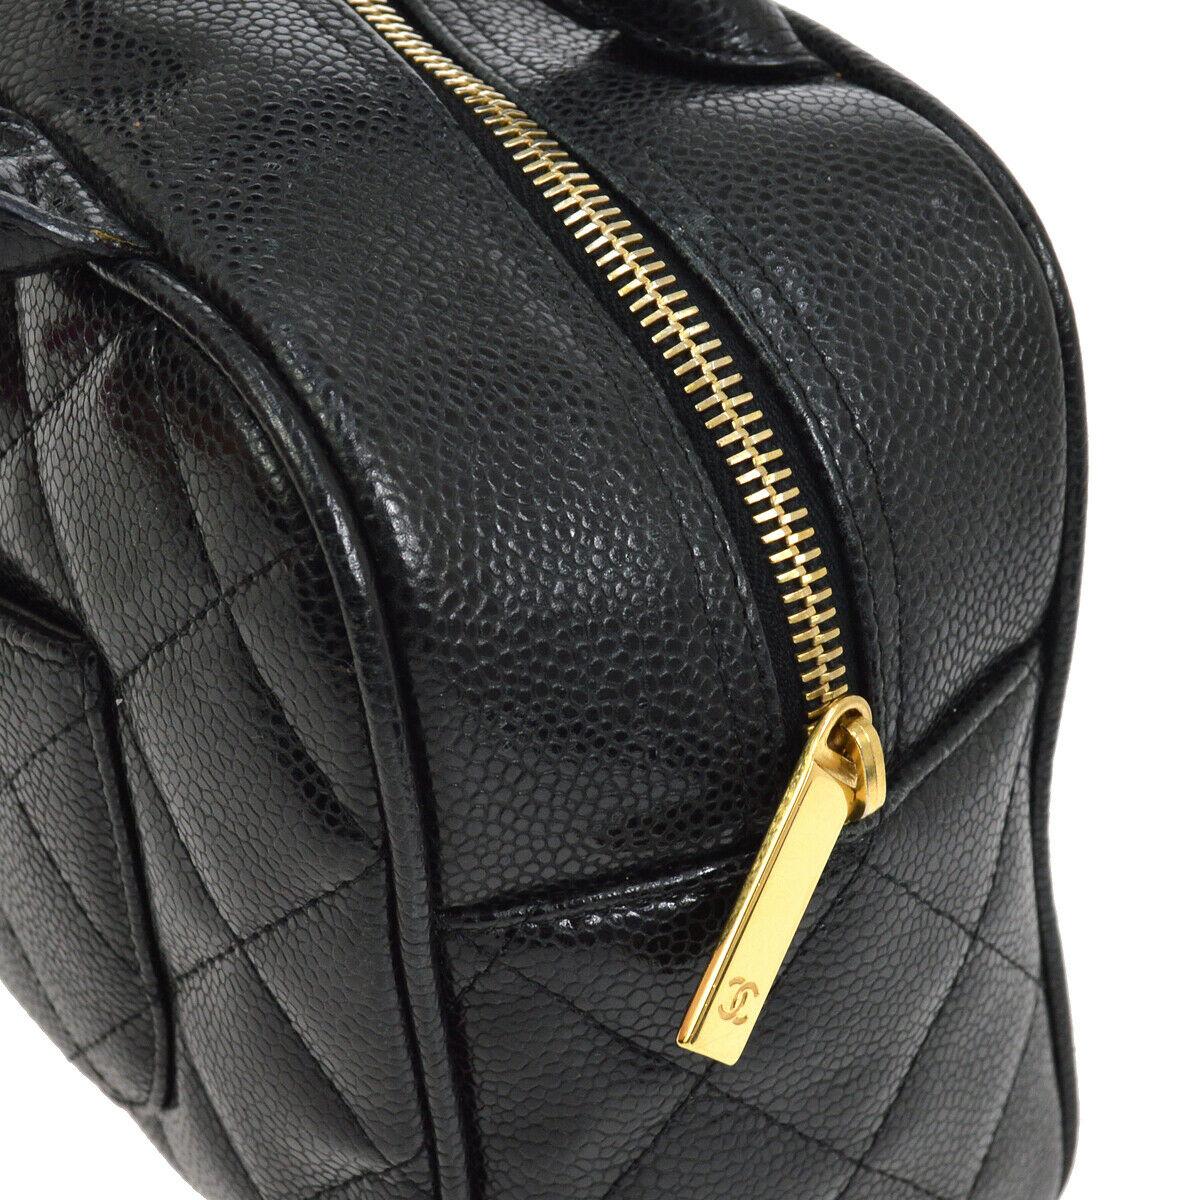 Chanel Black Leather Caviar Small Top Handle Satchel Bowling Tote Bag

Leather
Gold tone hardware
Zipper closure
Made in Italy
Woven lining
Handle drop 4